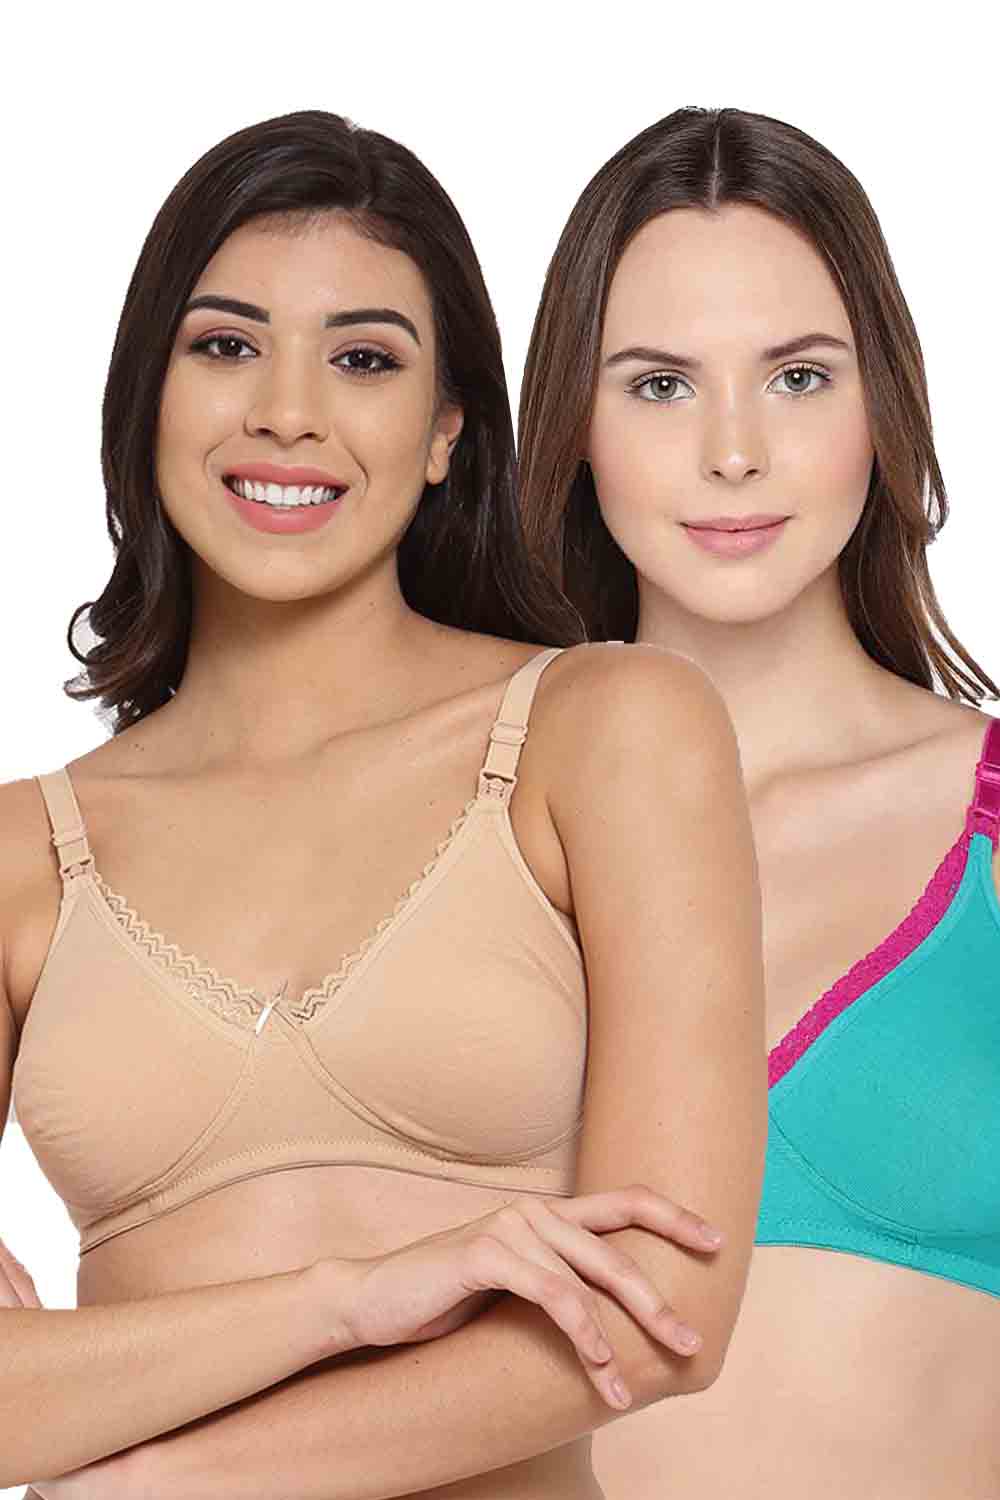 Buy In Beauty Girls Net and Padded Bra Pack of 6 Multicolor Size 30 to 40  Online In India At Discounted Prices